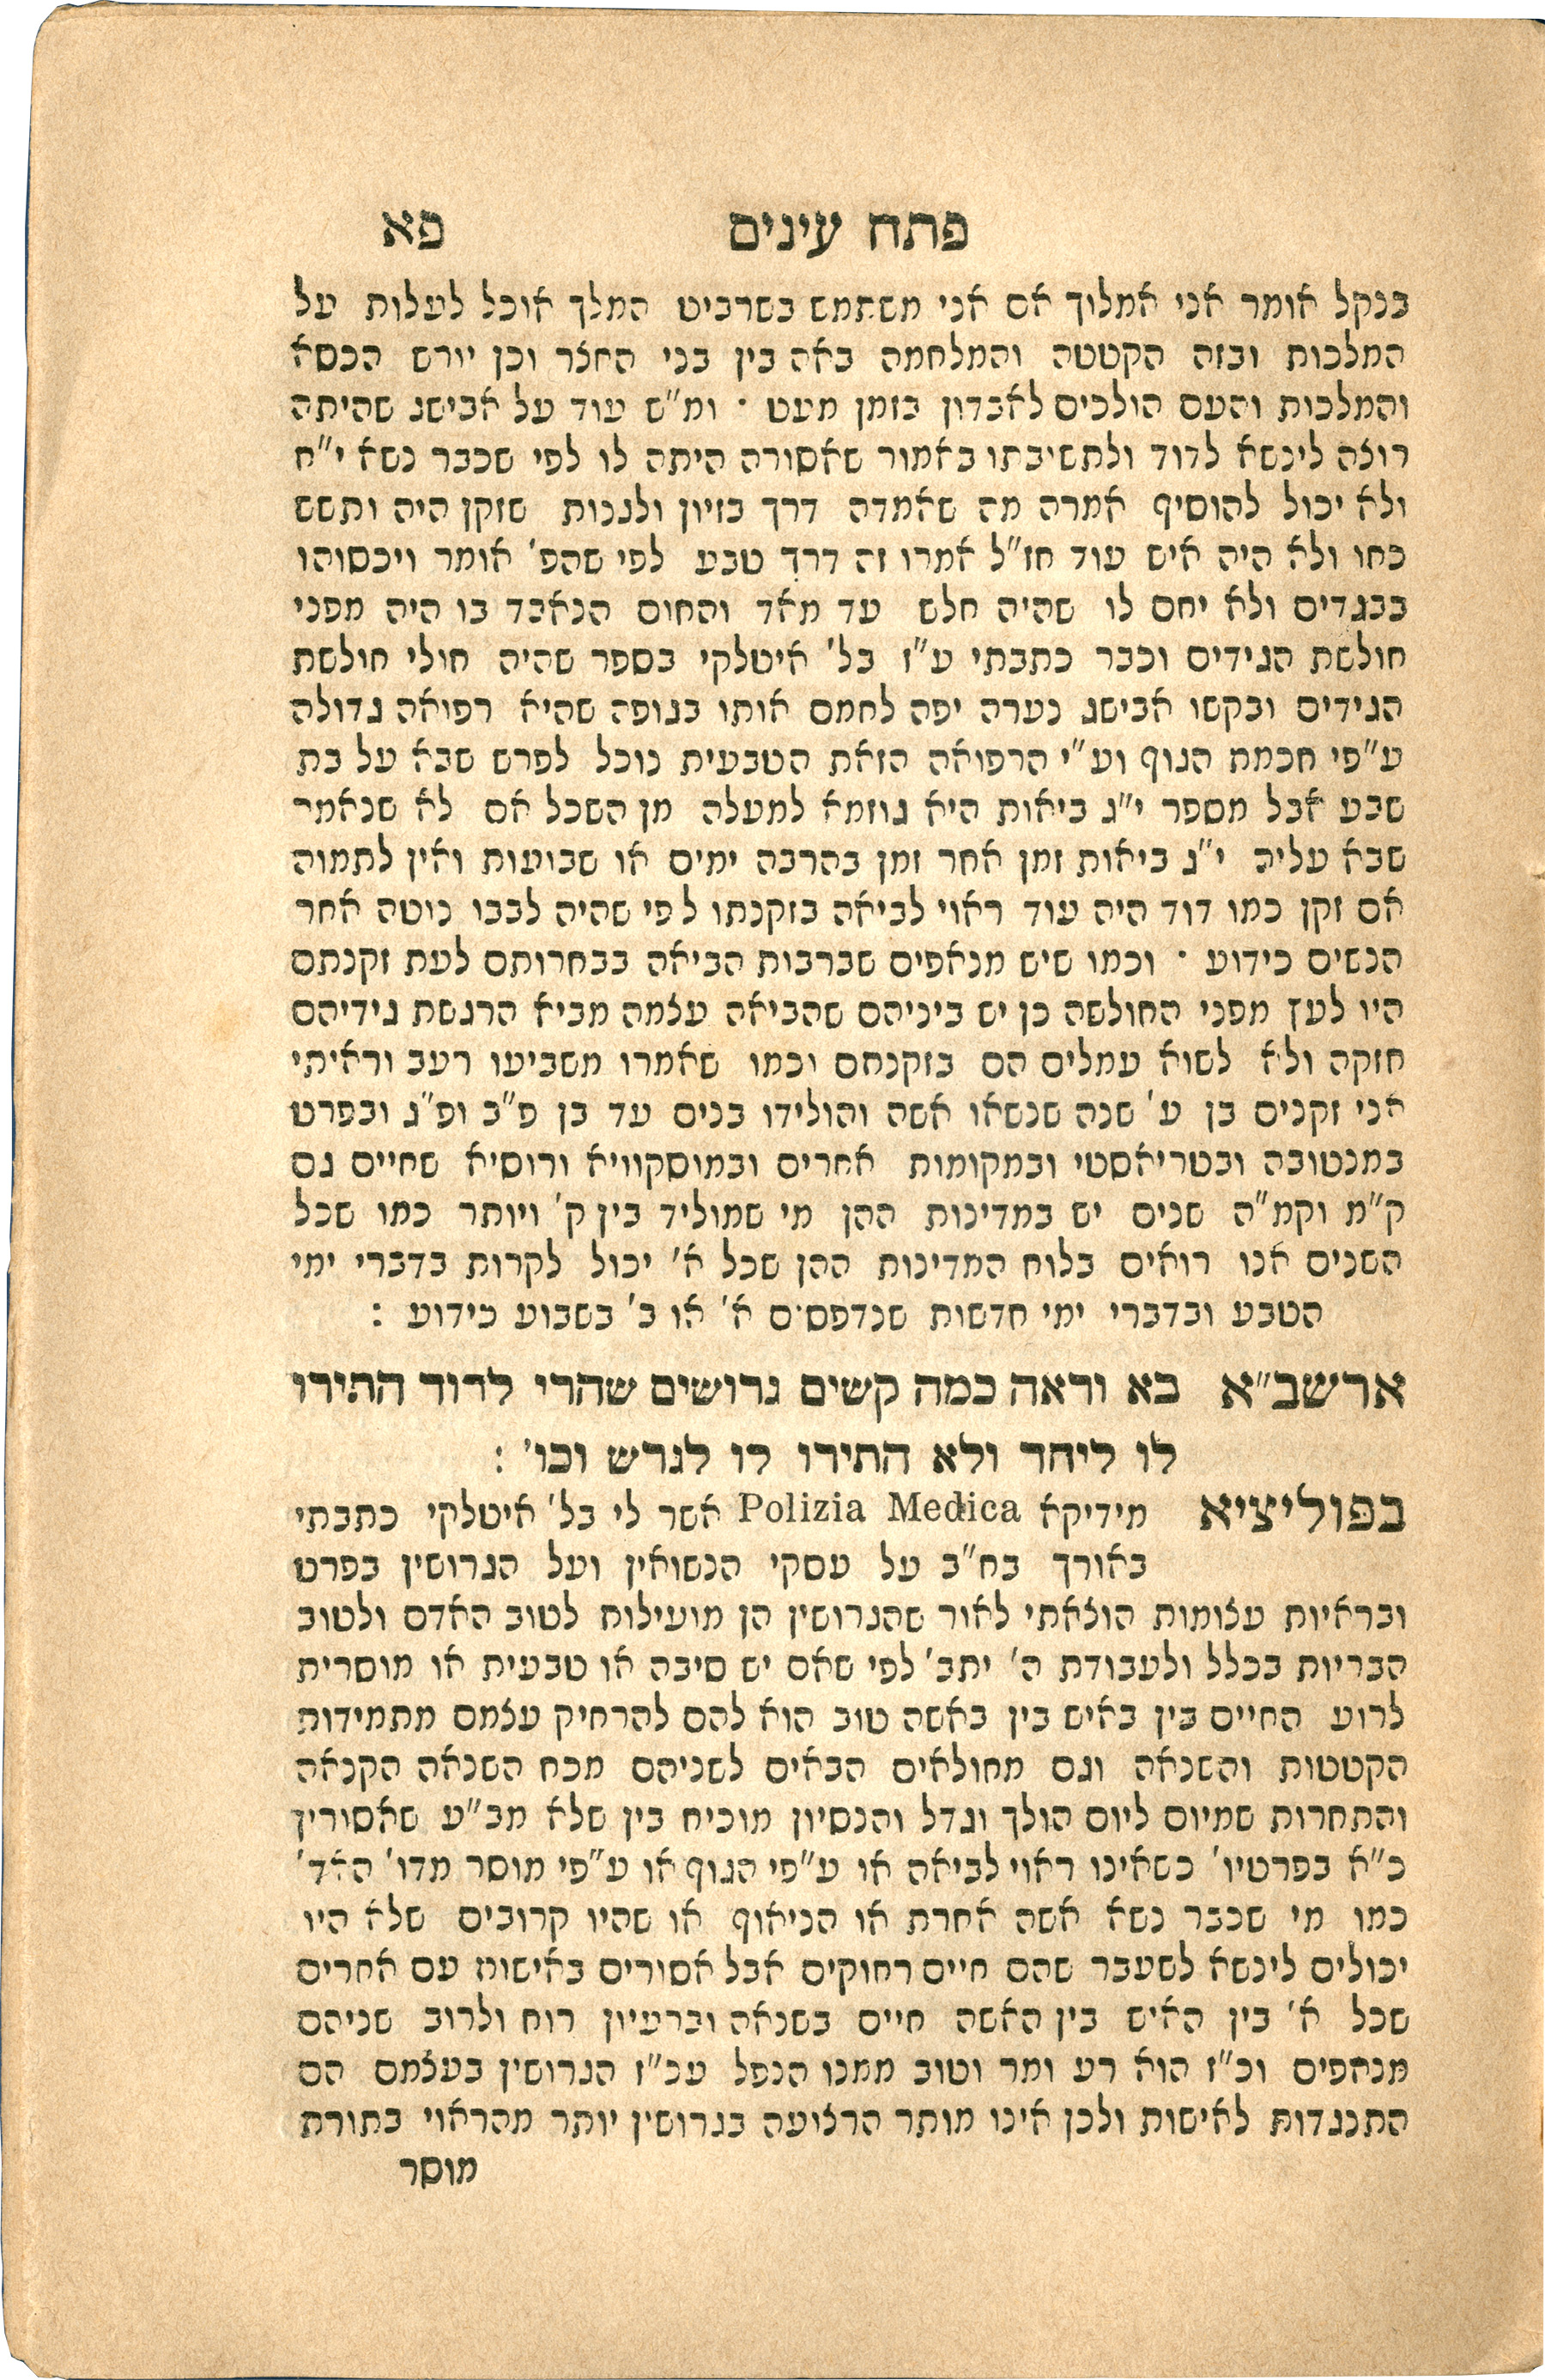 excerpt on p. 81a (re: Sanhedrin 22a)